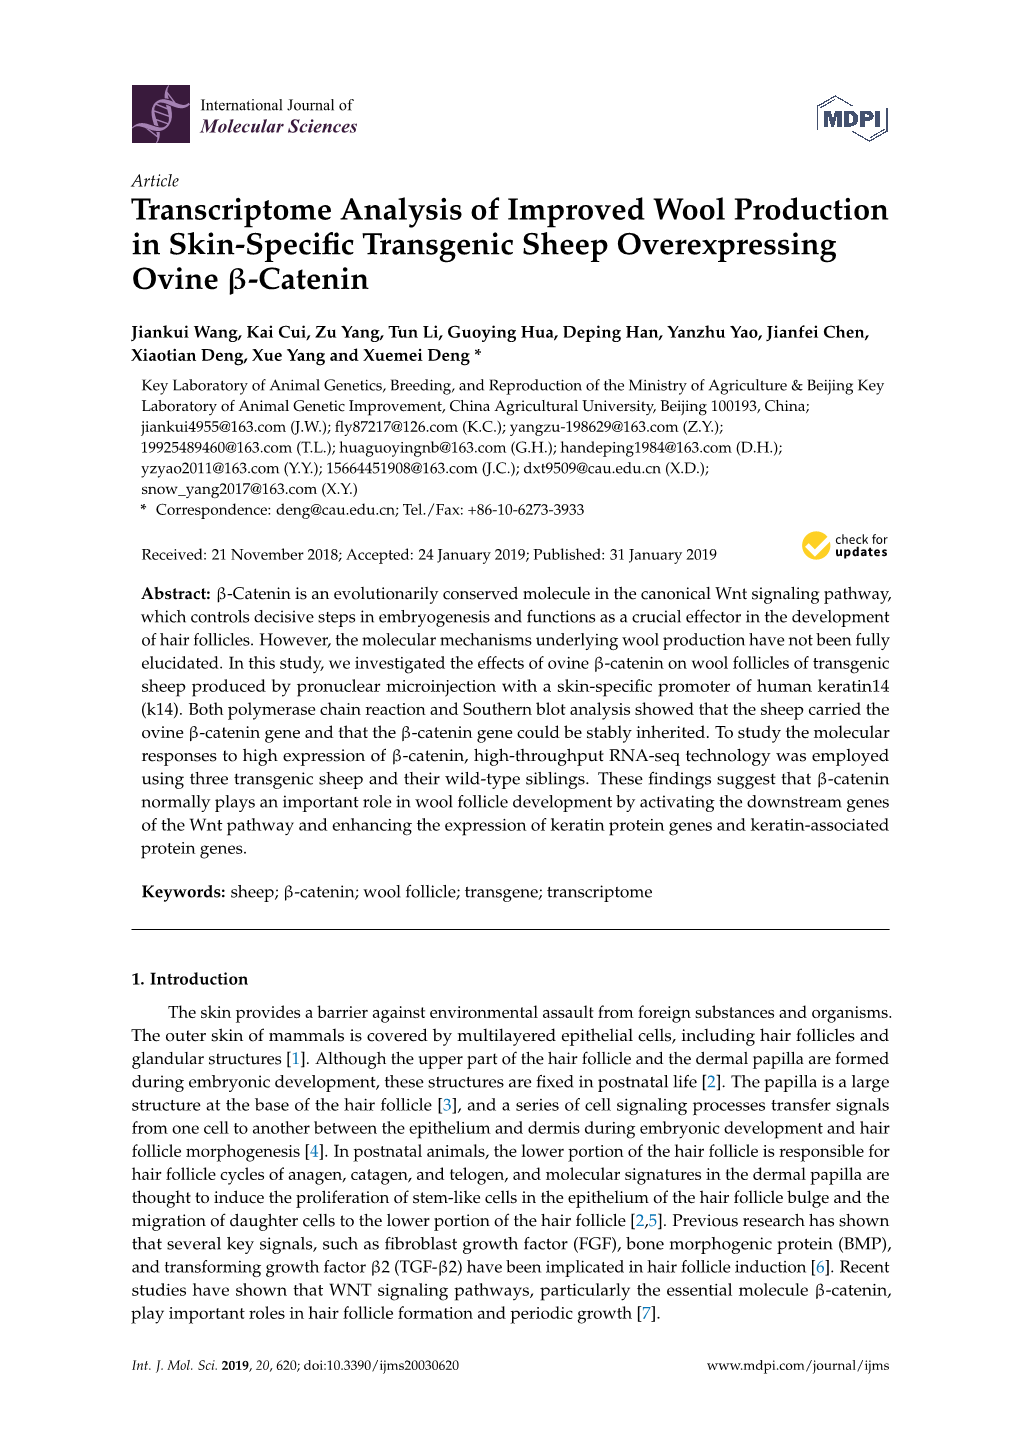 Transcriptome Analysis of Improved Wool Production in Skin-Specific